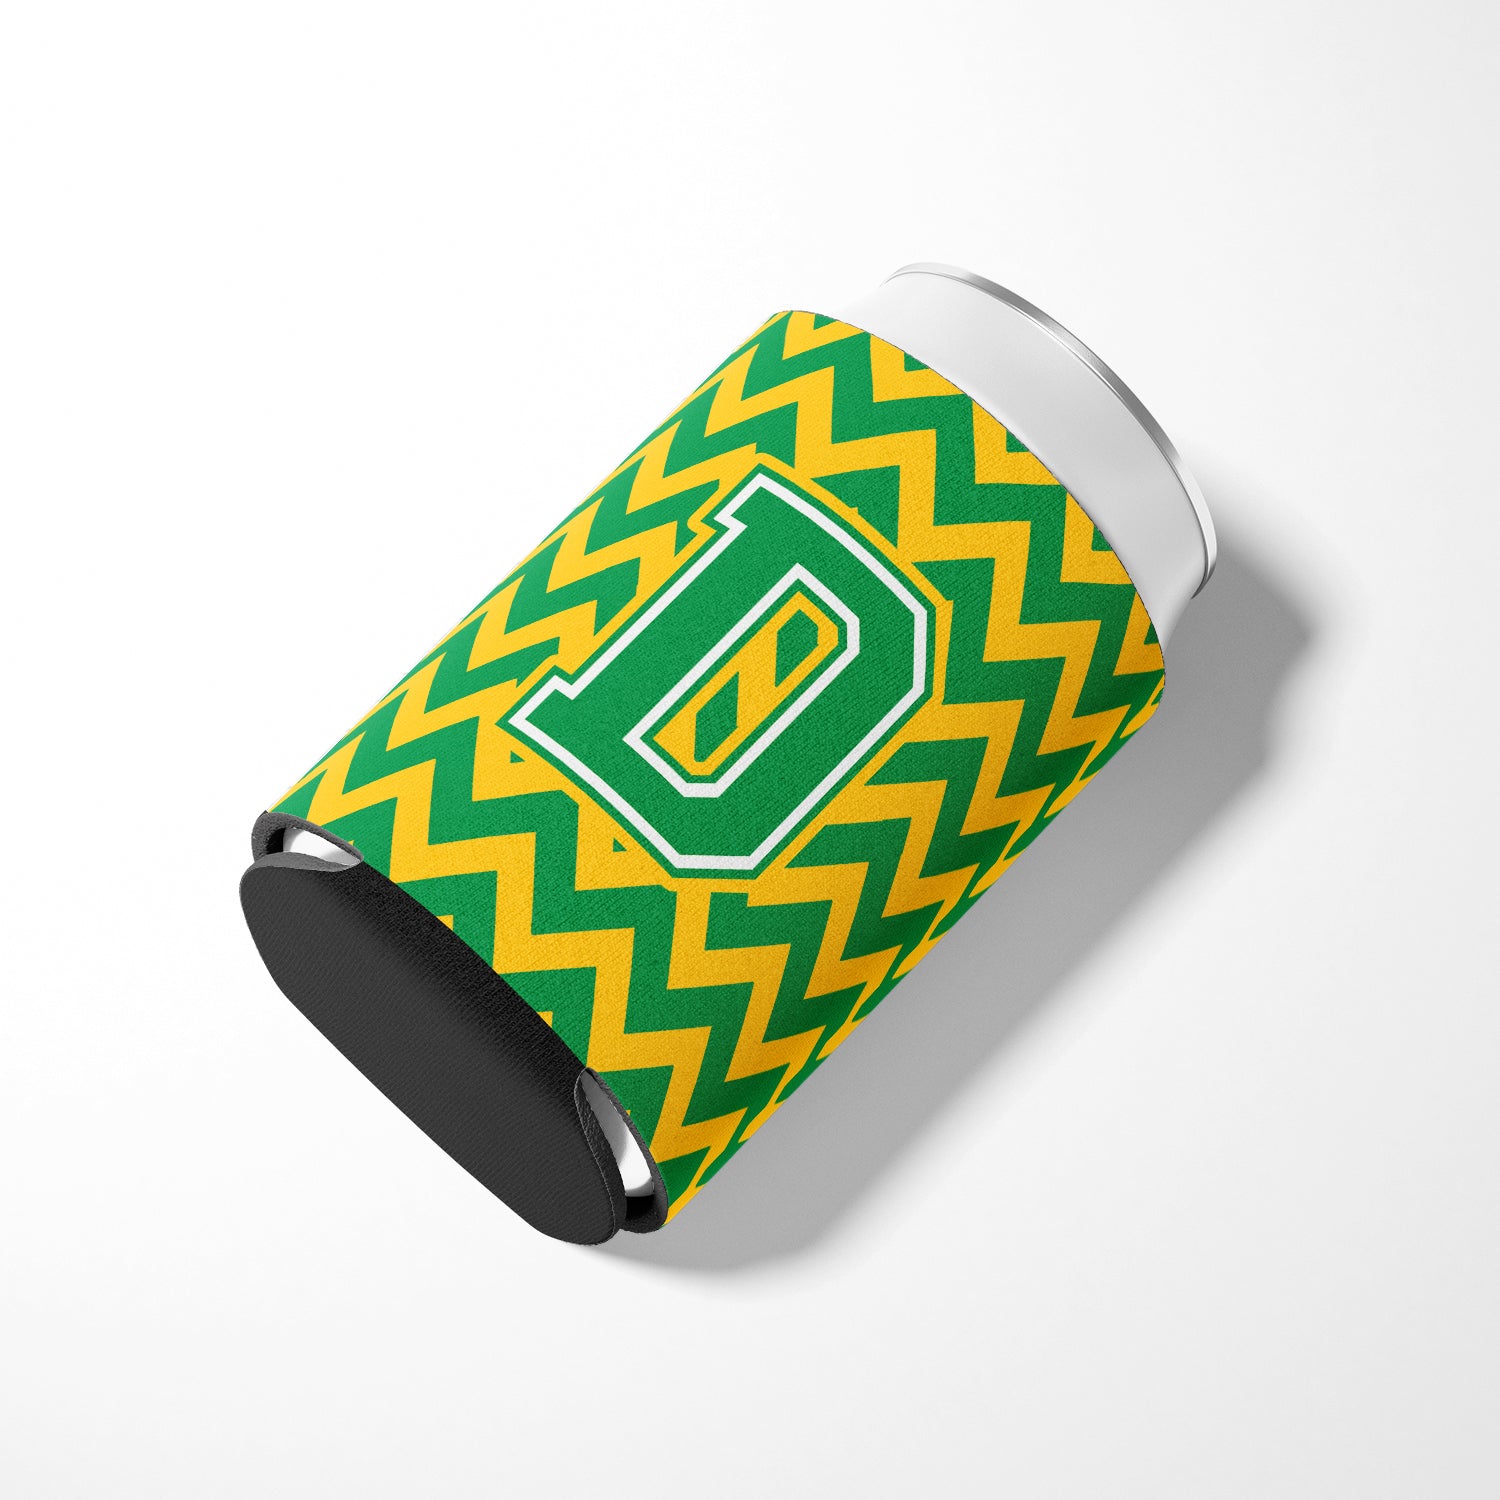 Letter D Chevron Green and Gold Can or Bottle Hugger CJ1059-DCC.